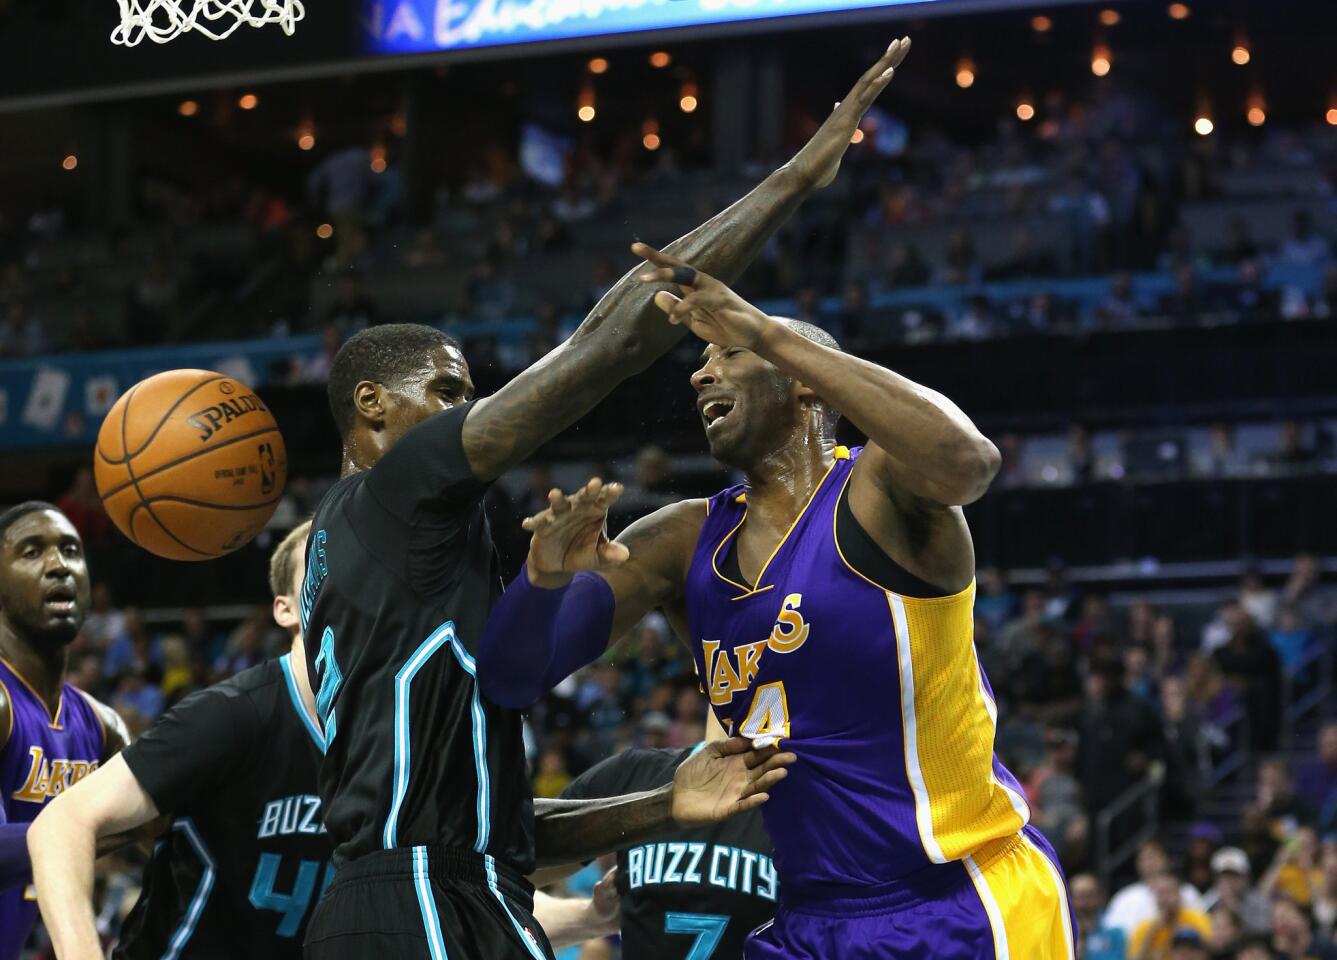 Lakers forward Kobe Bryant attempts to pass around Hornets forward Marvin Williams.